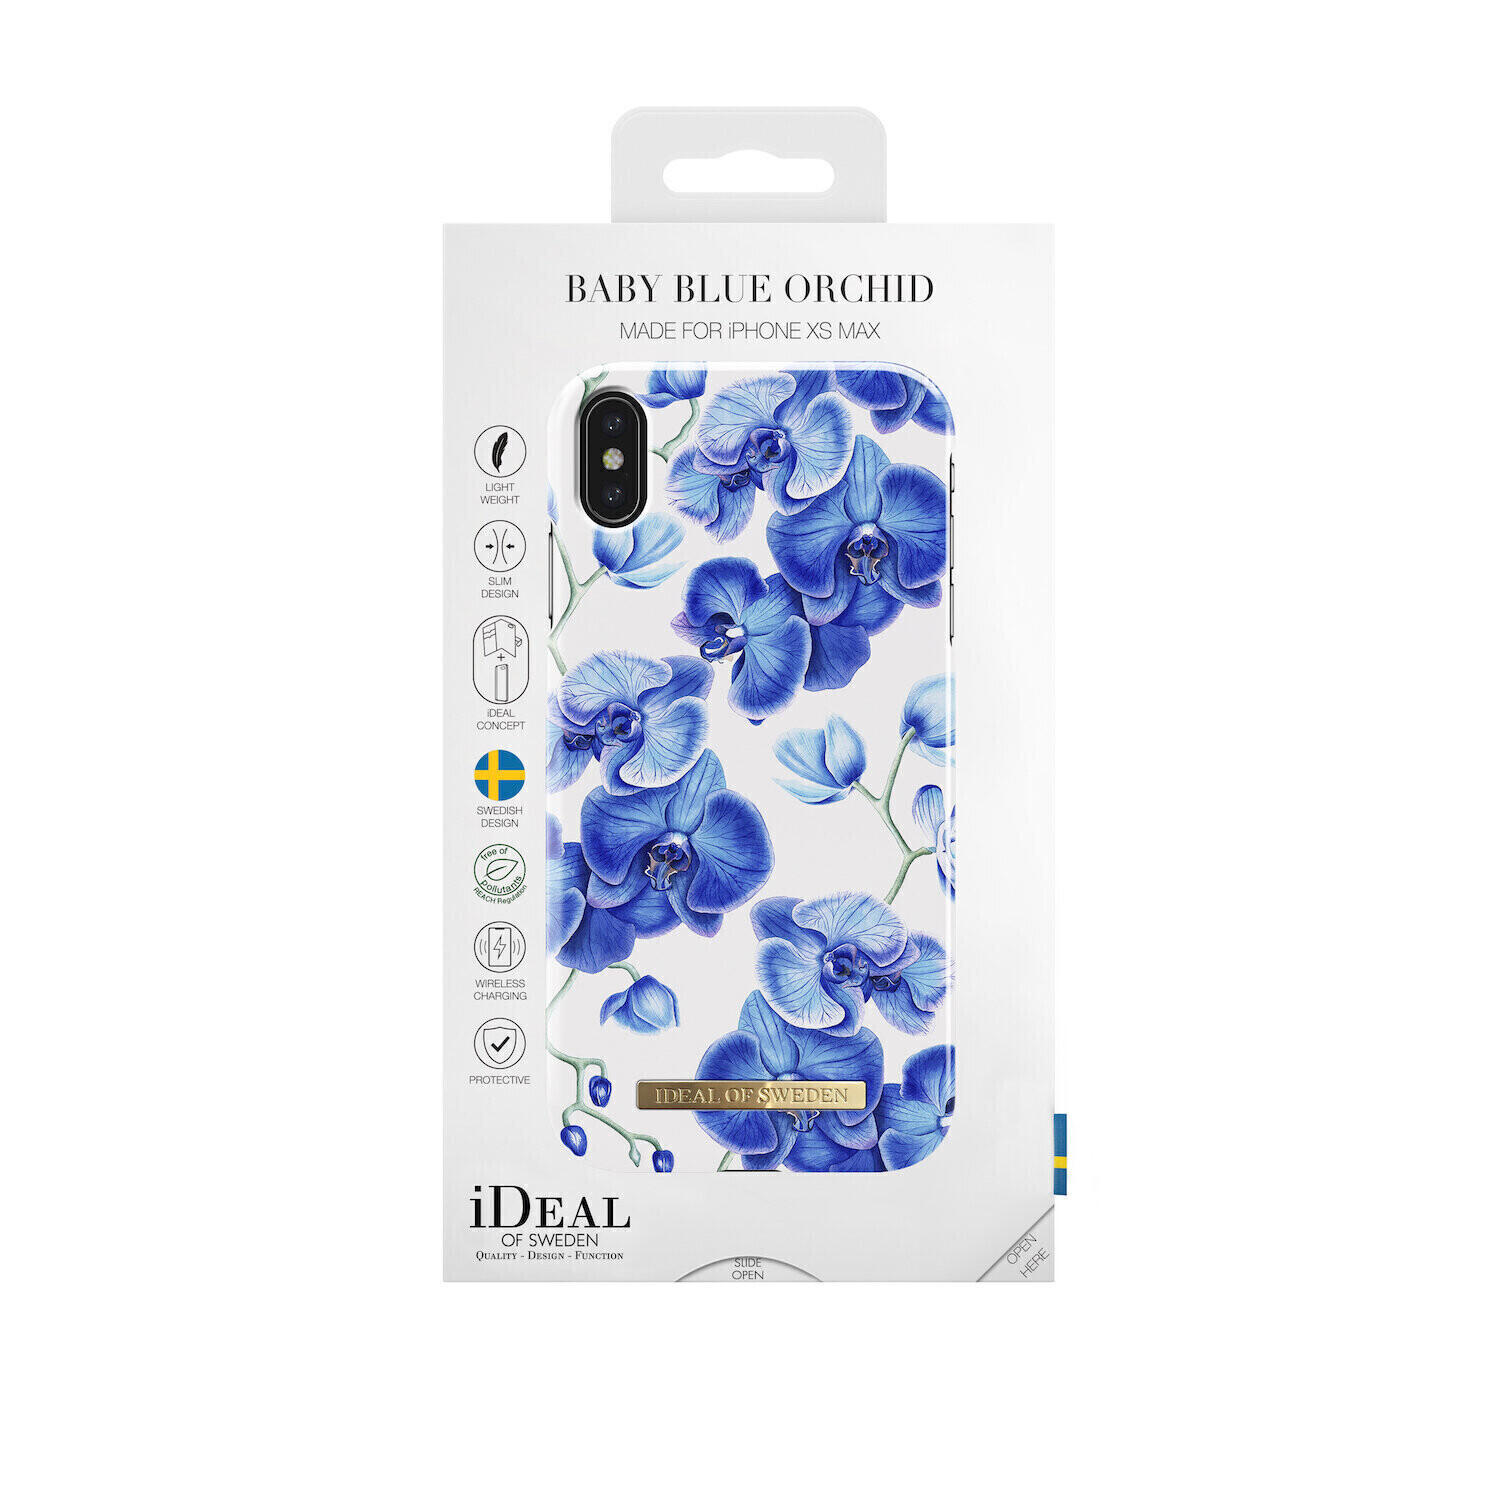 iDeal Of Sweden iPhone Xs Max Fashion Case S/S 2018, Baby Blue Orchid